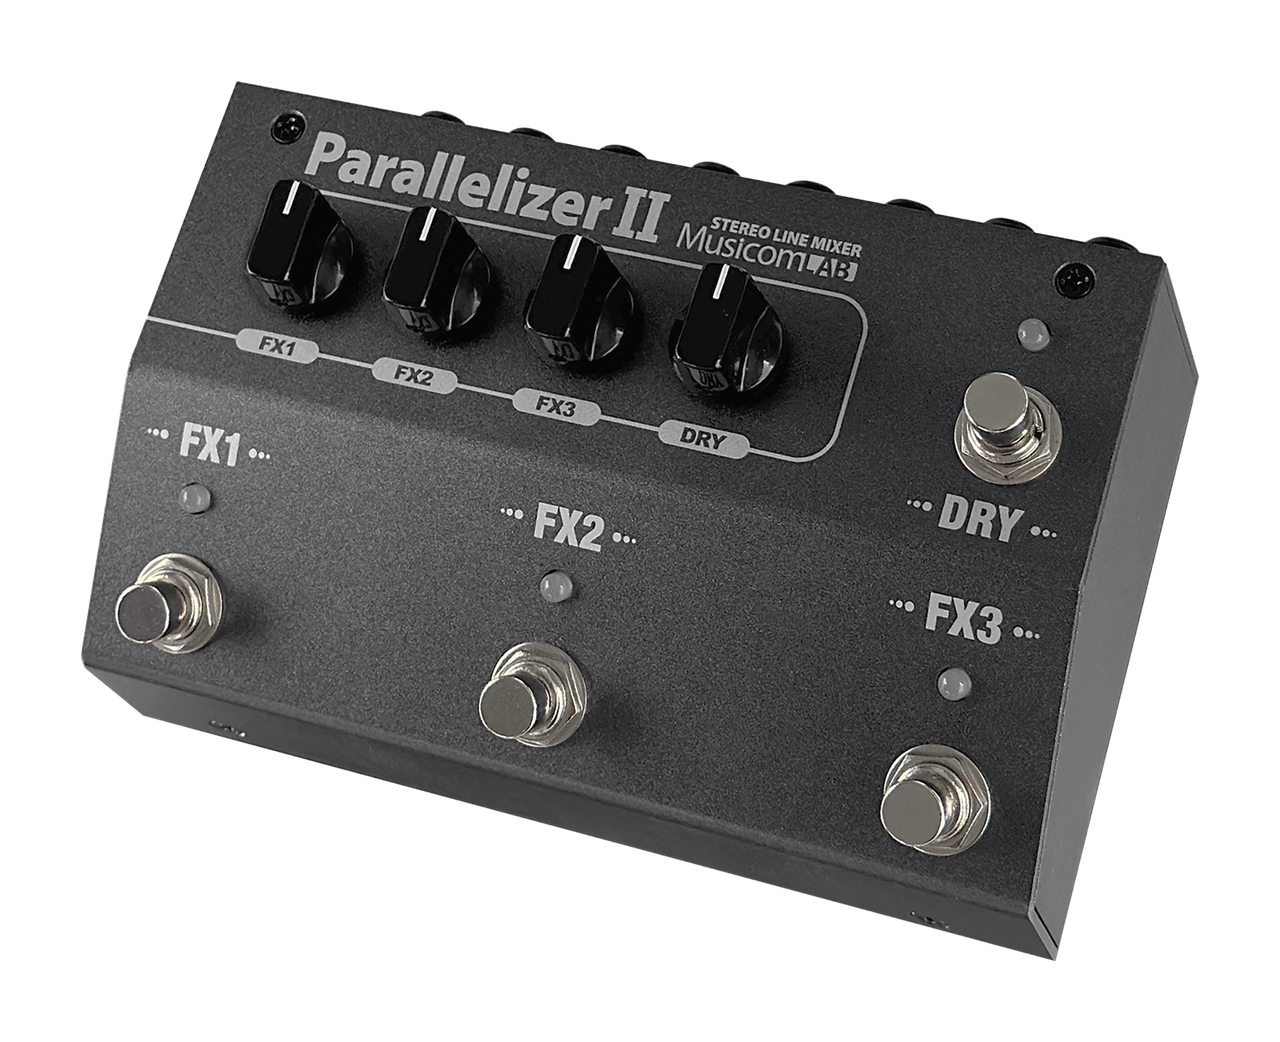 The Guitar Sanctuary | MusicomLAB | Parallelizer II | Stereo Line 